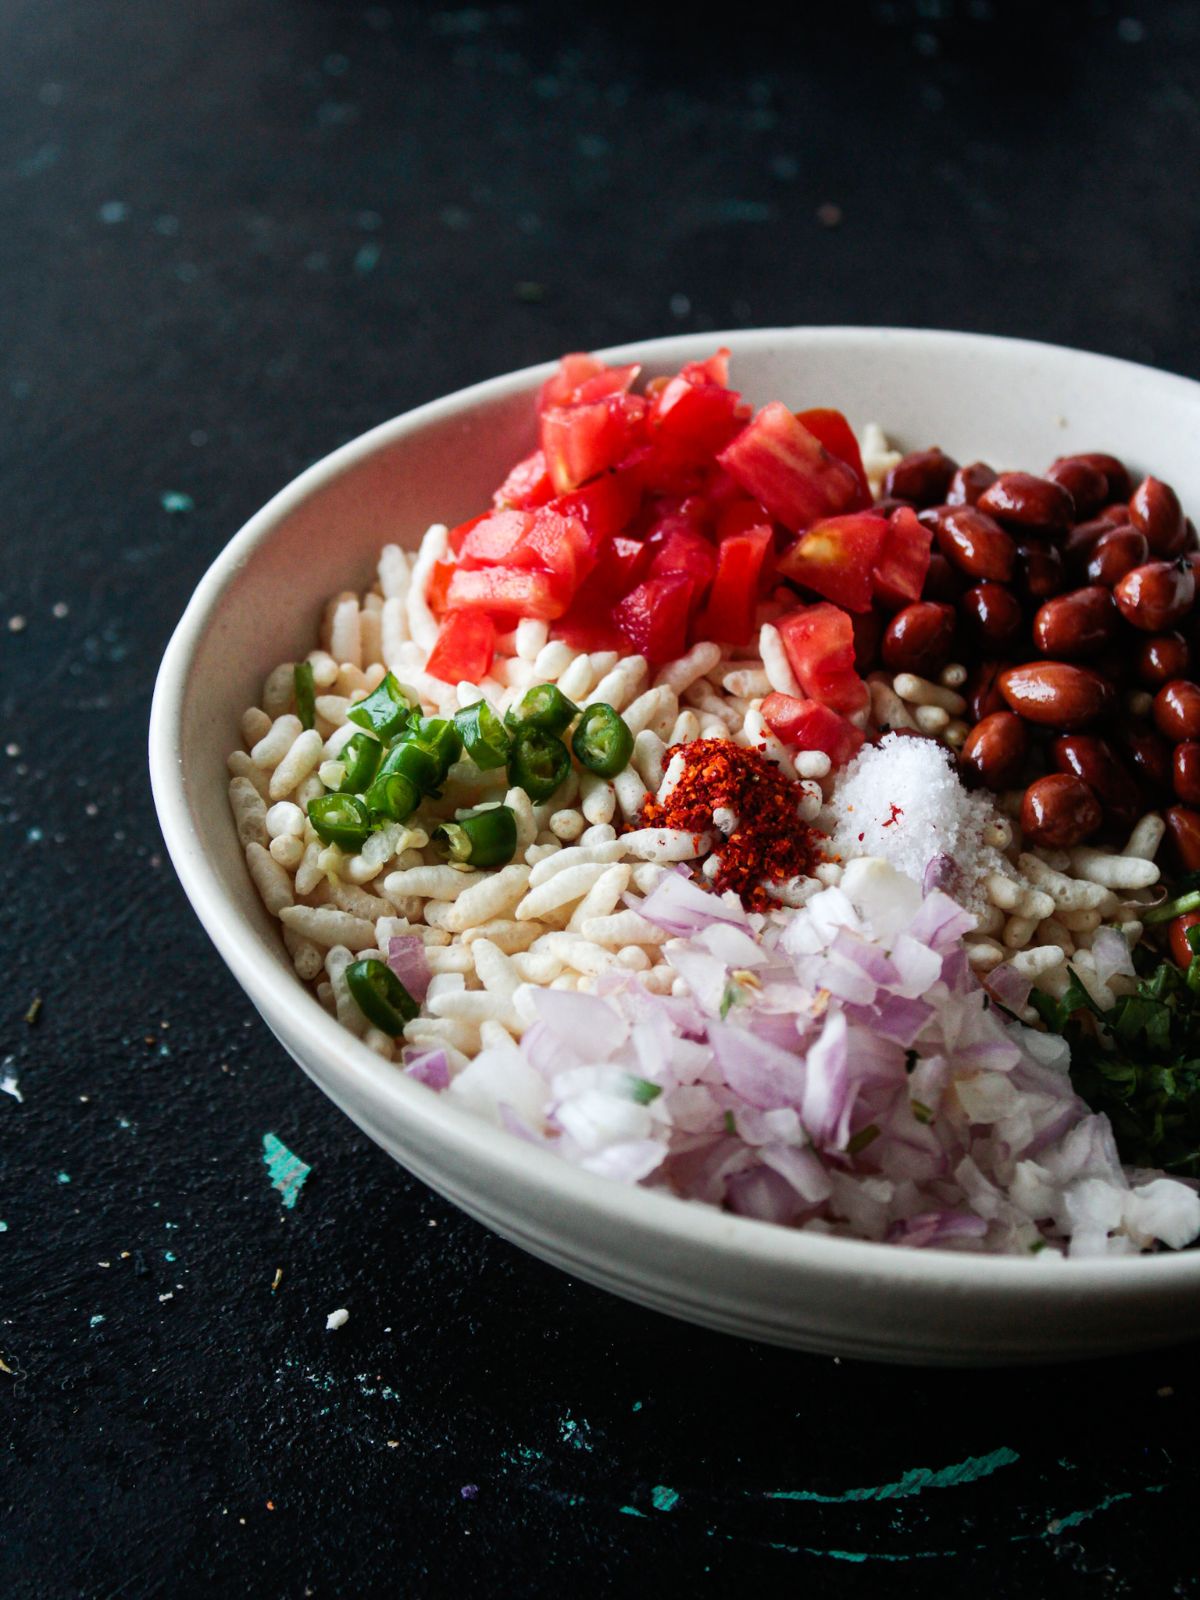 puffed rice, tomato, peanuts, onion, and spices in white bowl on black counter